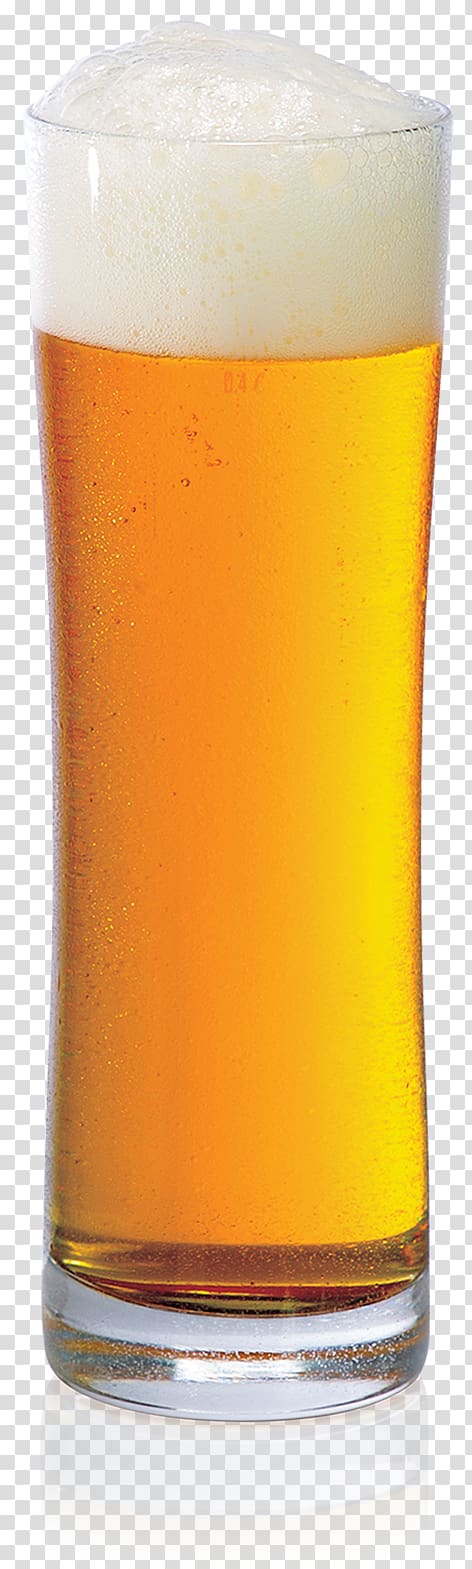 Beer cocktail Pint glass Wheat beer Imperial pint, beer posters transparent background PNG clipart